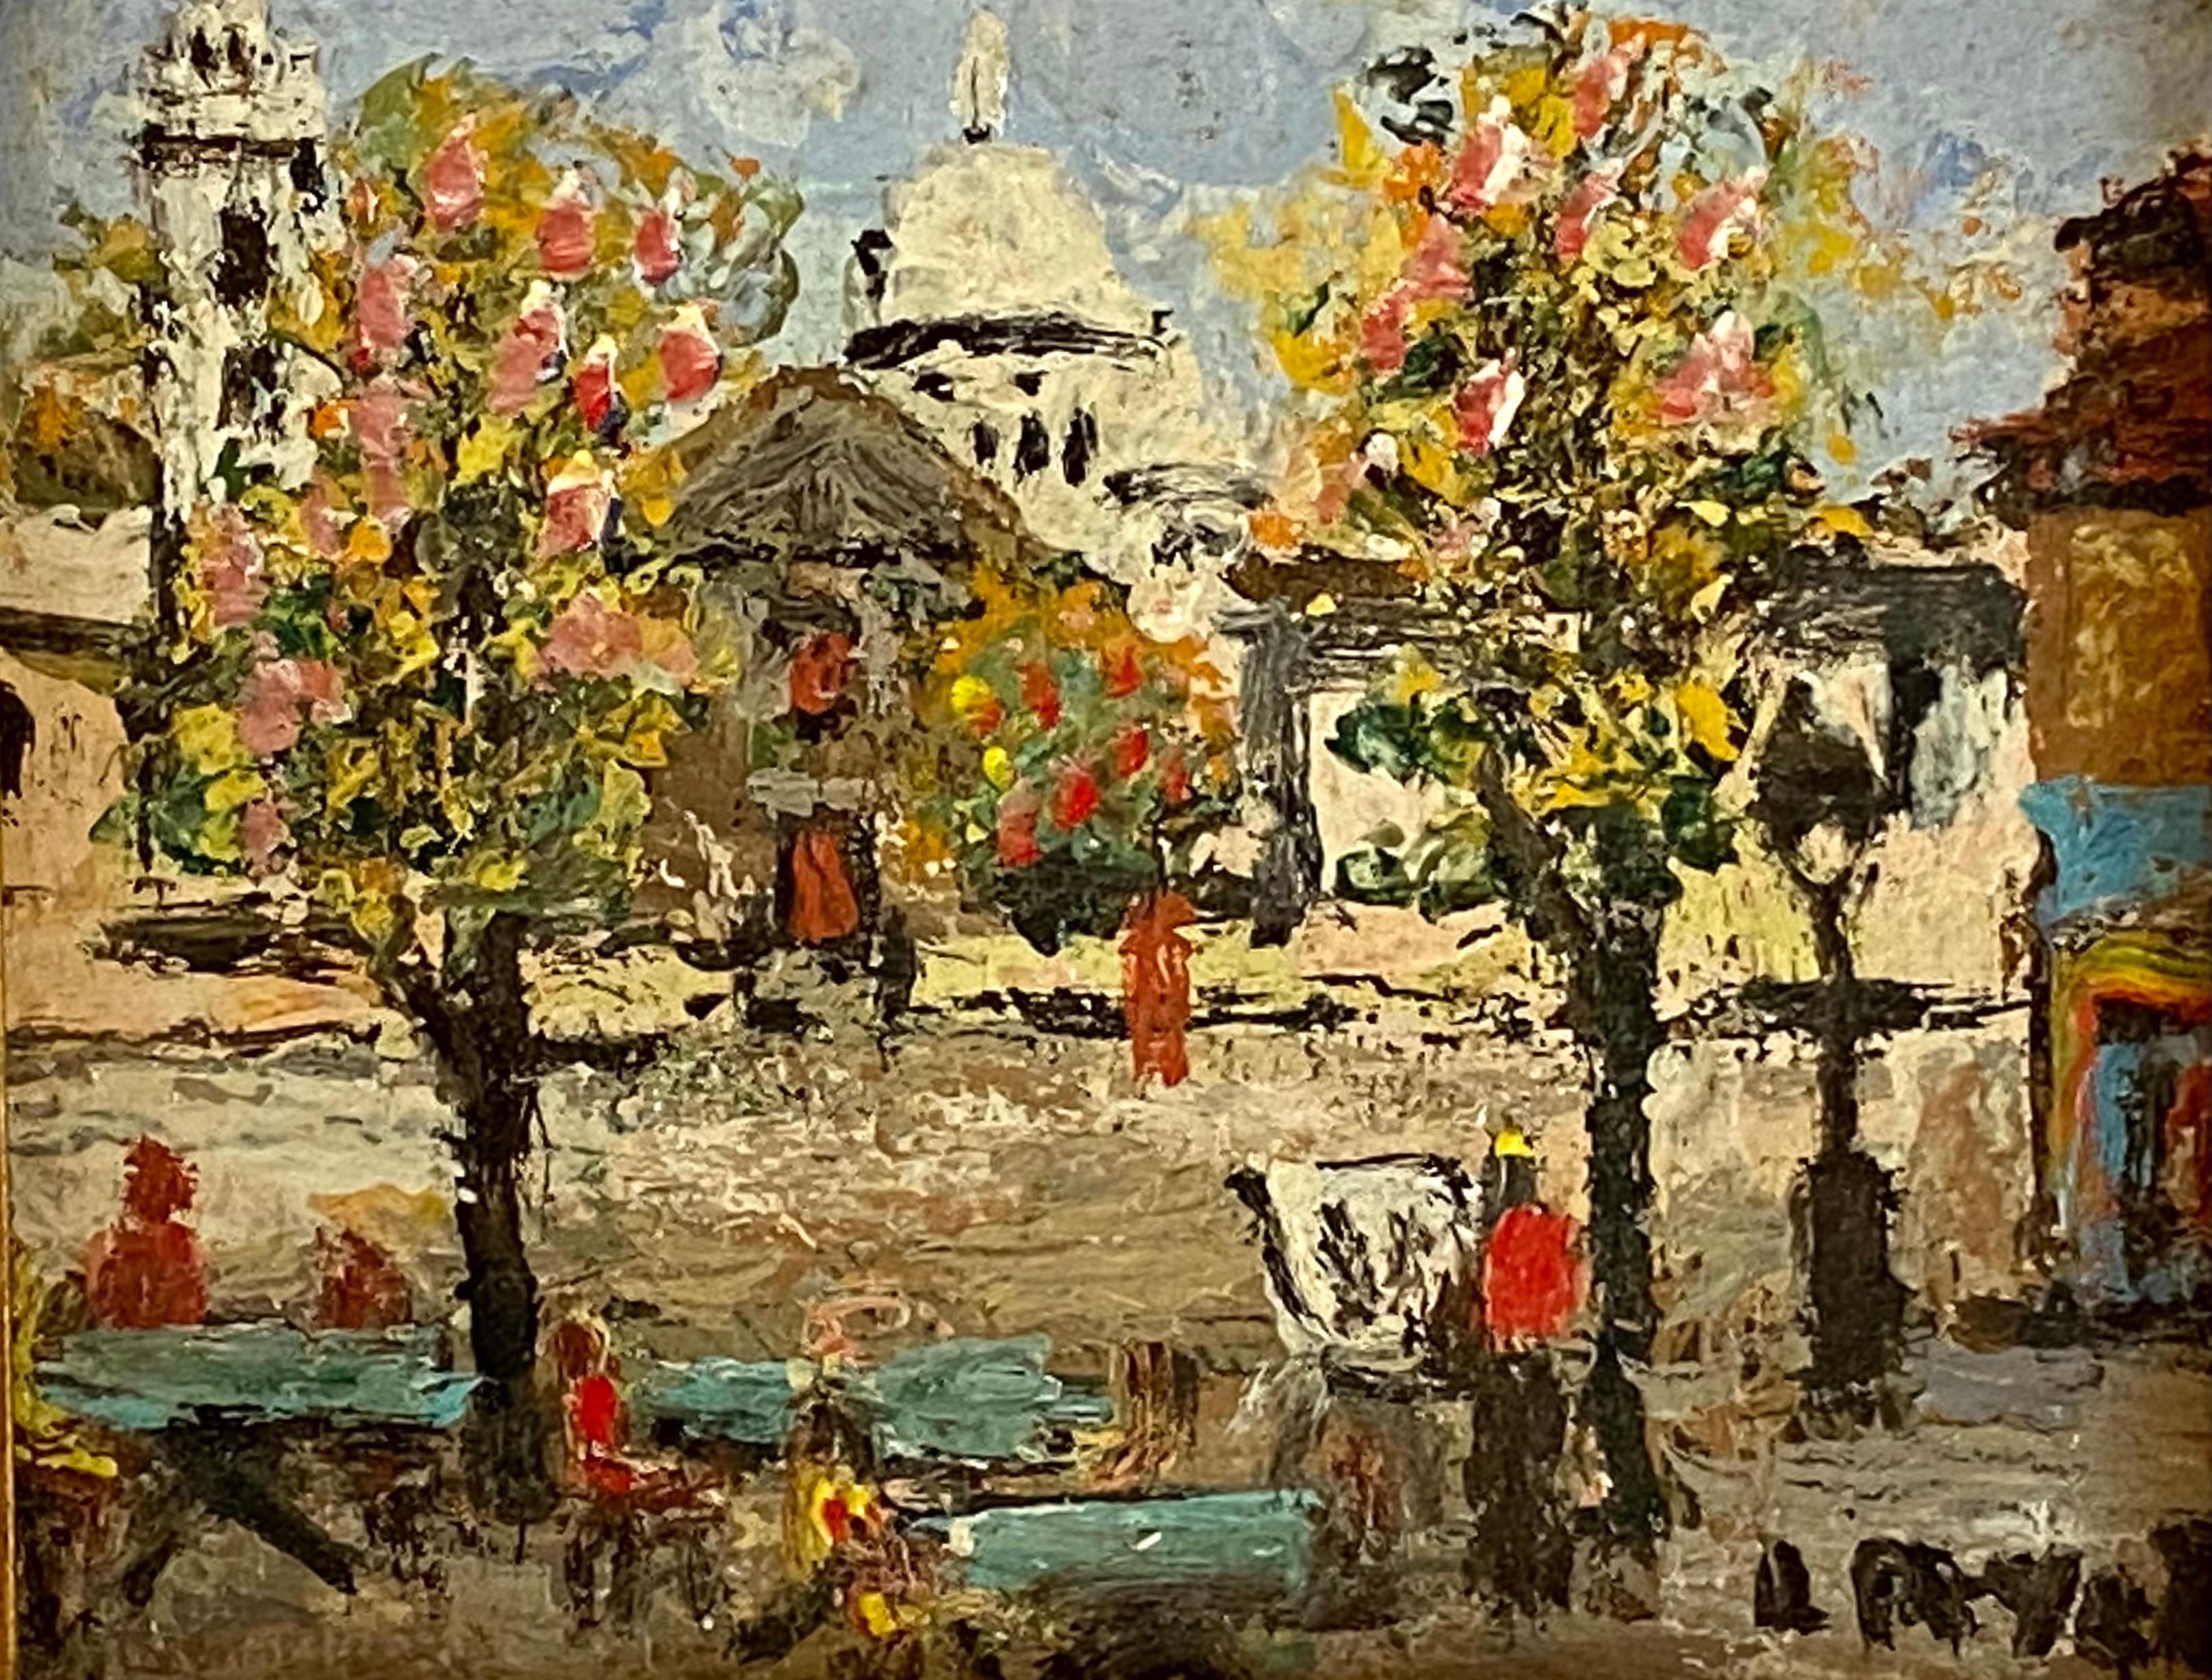 Unknown - ”Place du Tertre, Montmartre” For Sale at 1stDibs